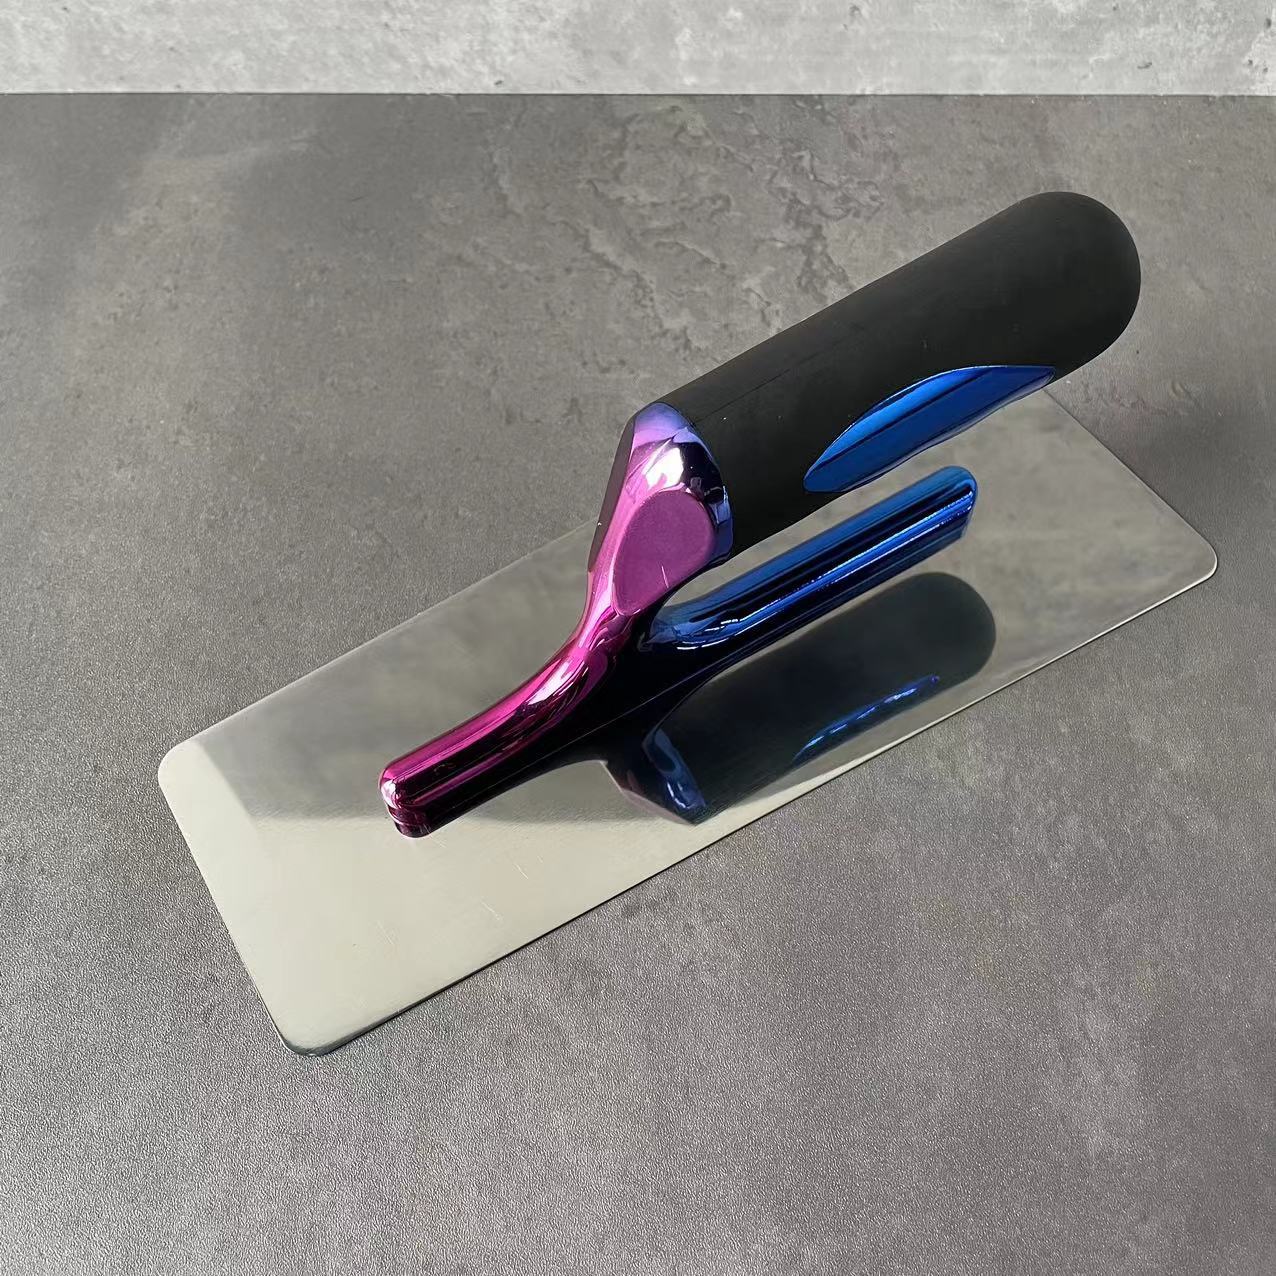 https://www.elehand.com/st pain-steel-trowel-tool-with-rubber-handle-product/